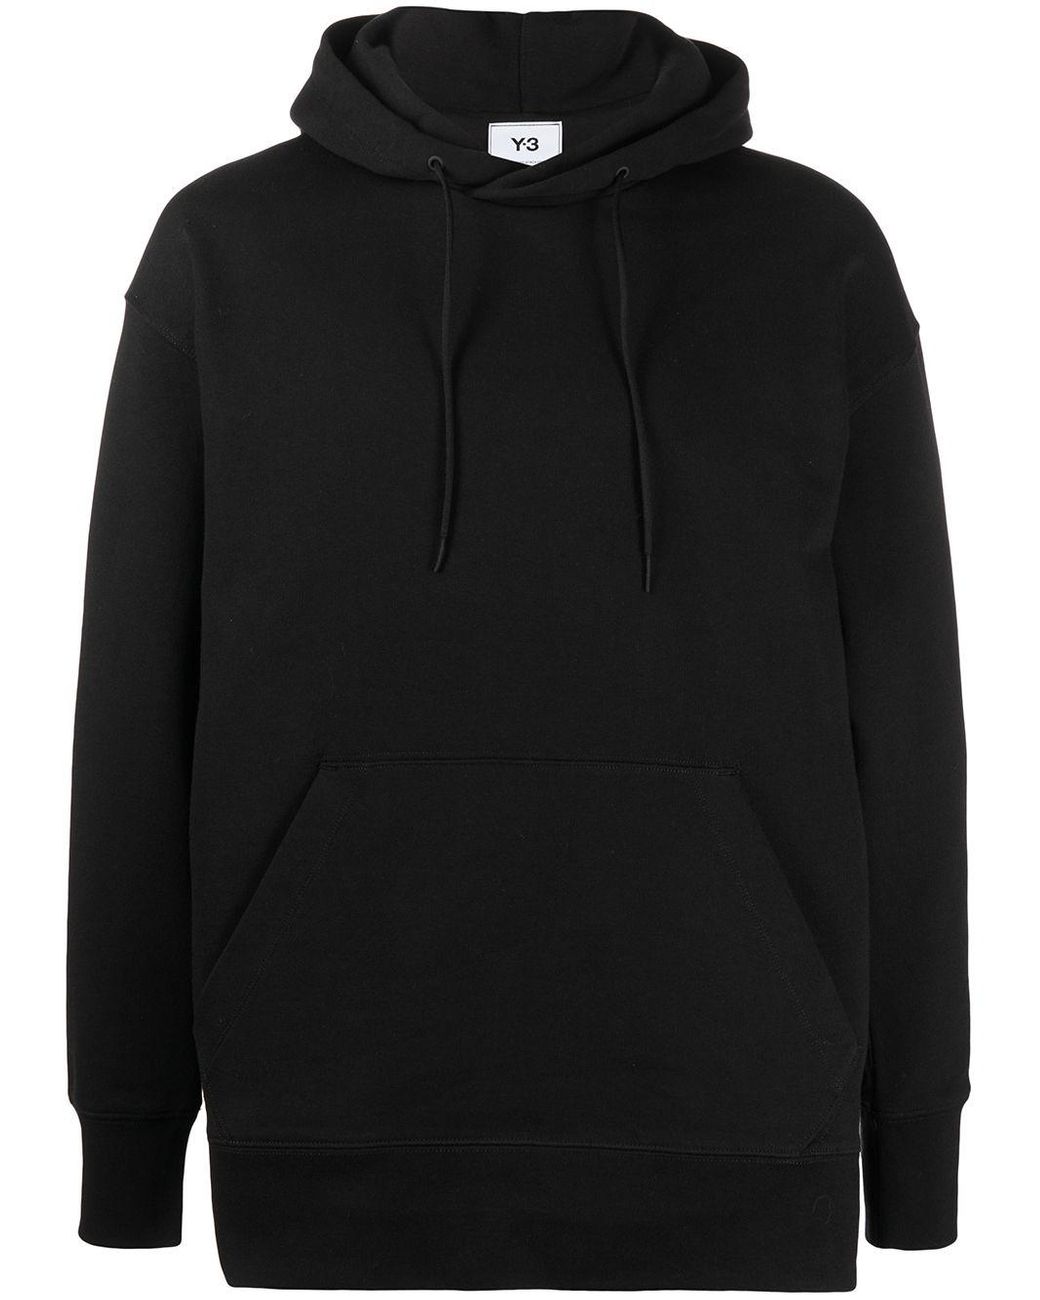 Y-3 3 Stripes Terry Cotton Hoodie in Black for Men - Lyst